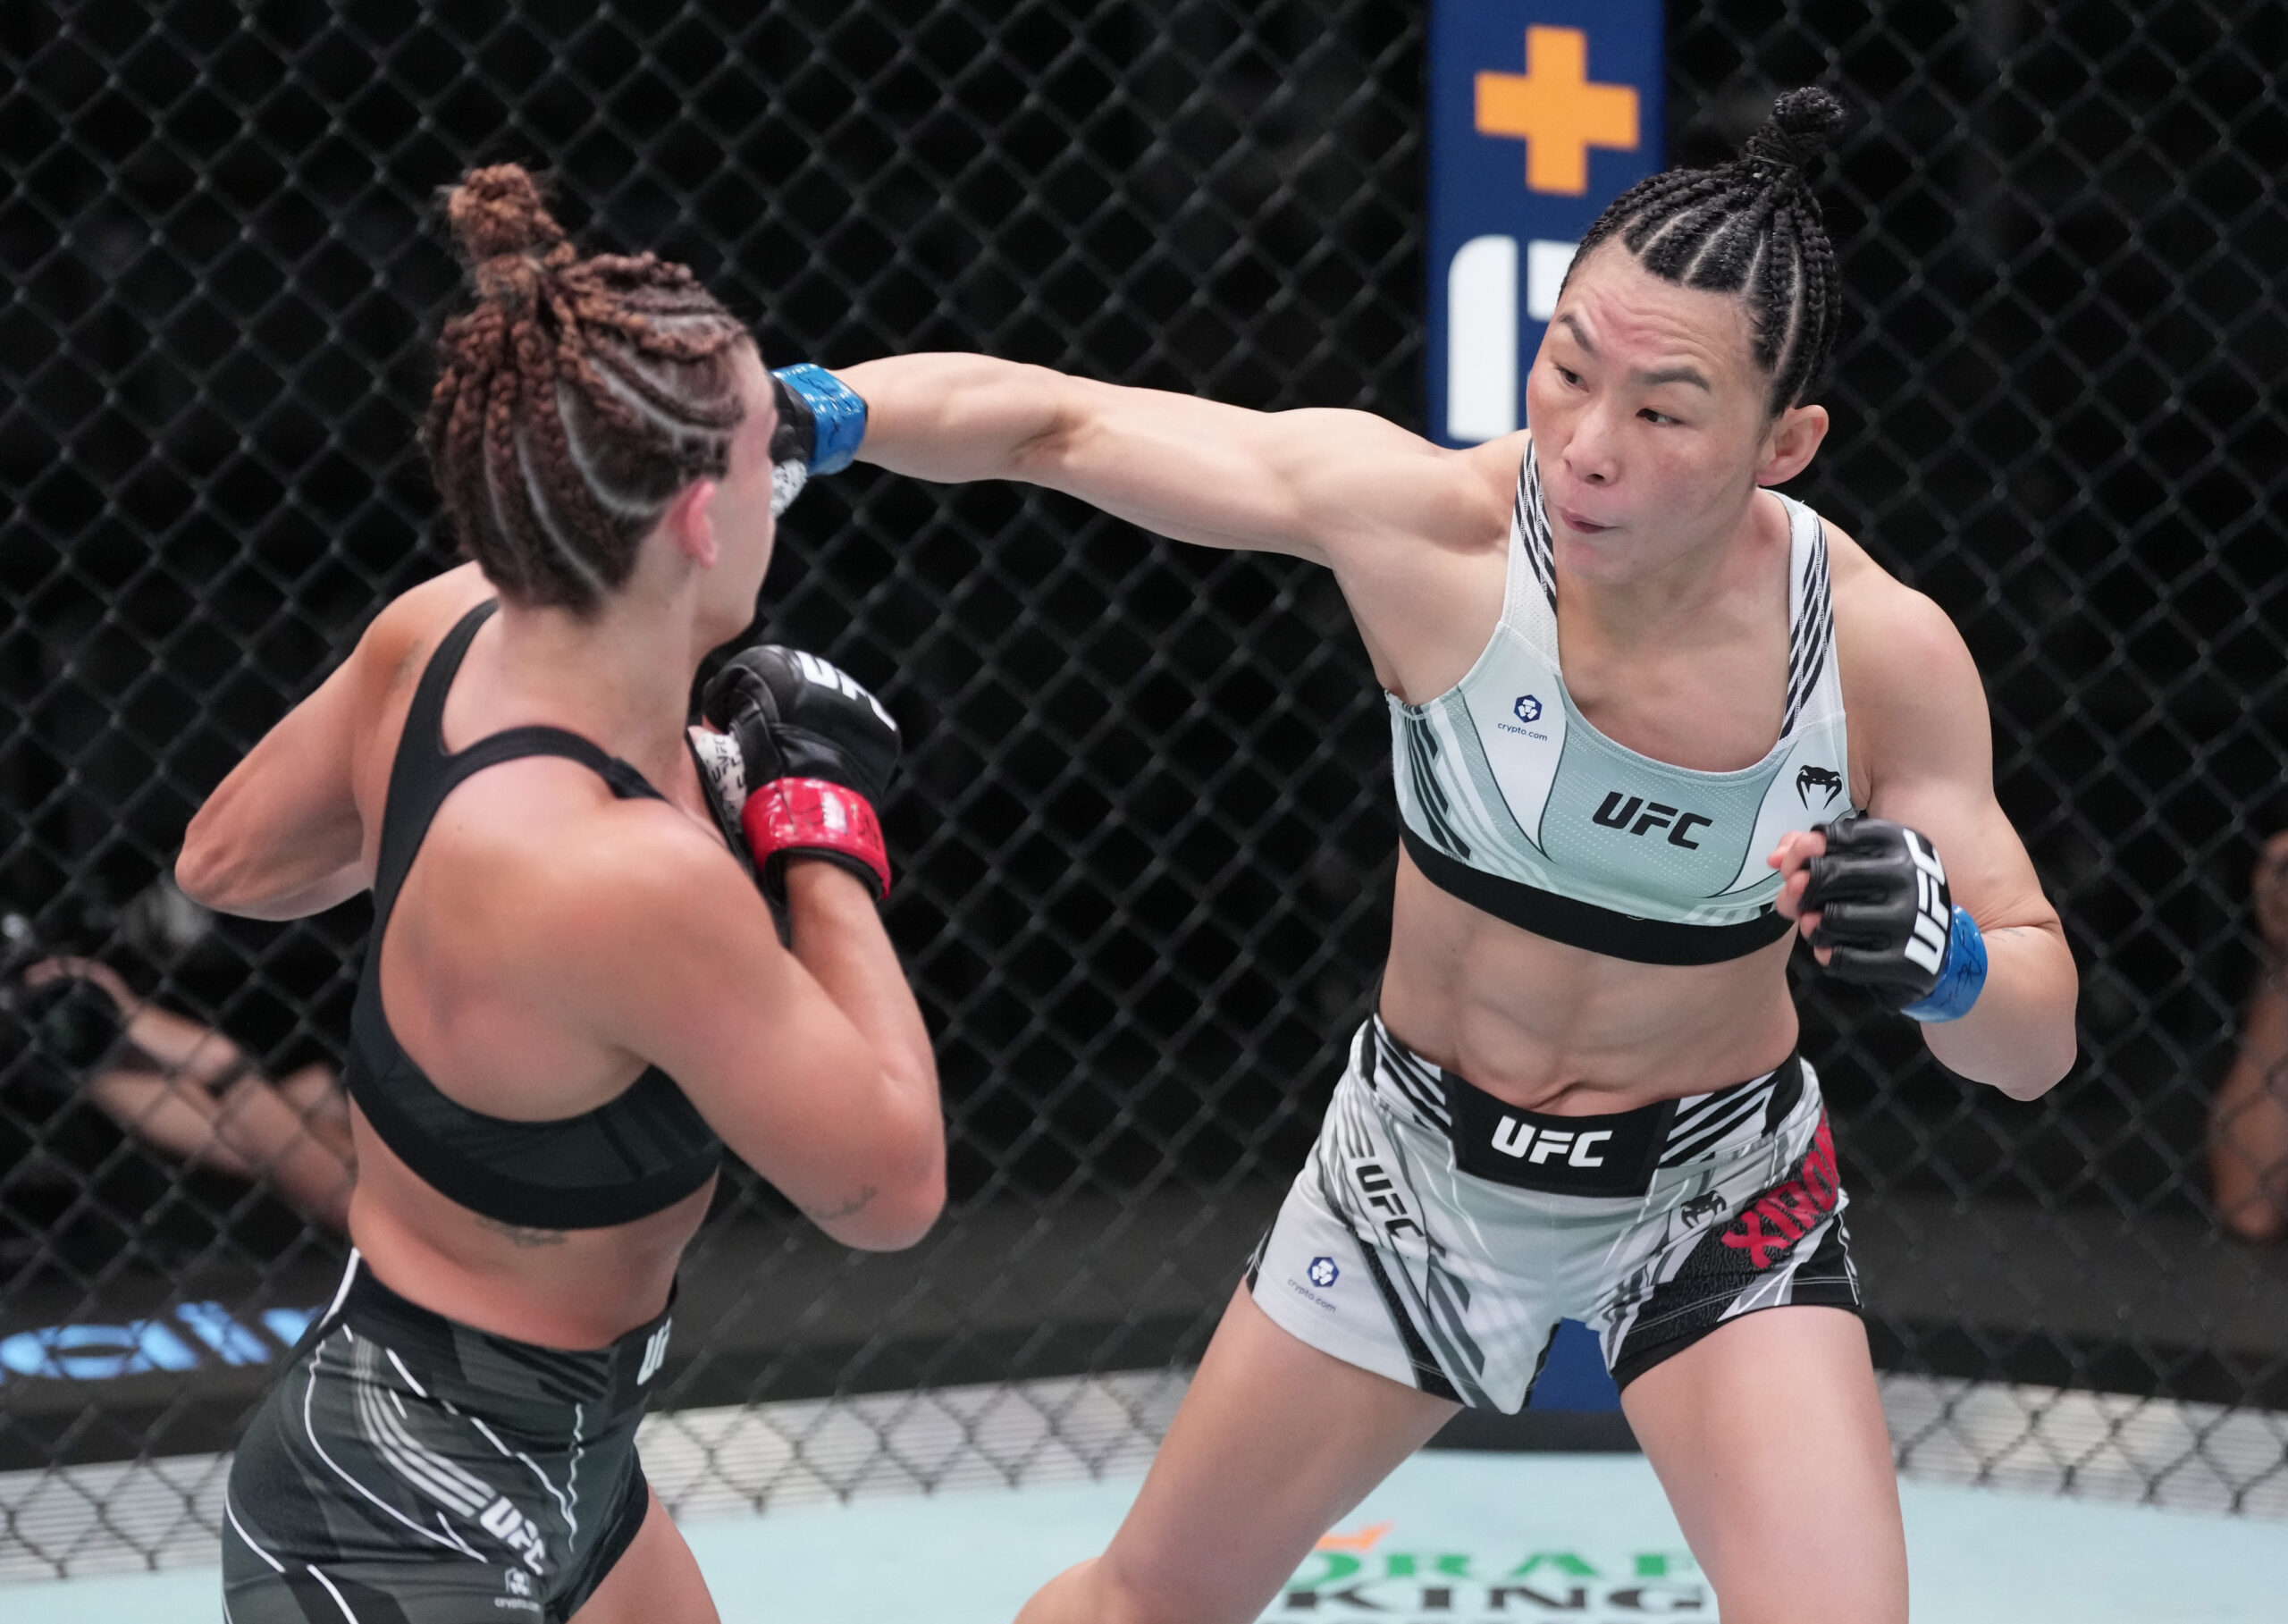 UFC Fight Night 211 results: Yan Xiaonan takes majority decision over Mackenzie Dern in main event